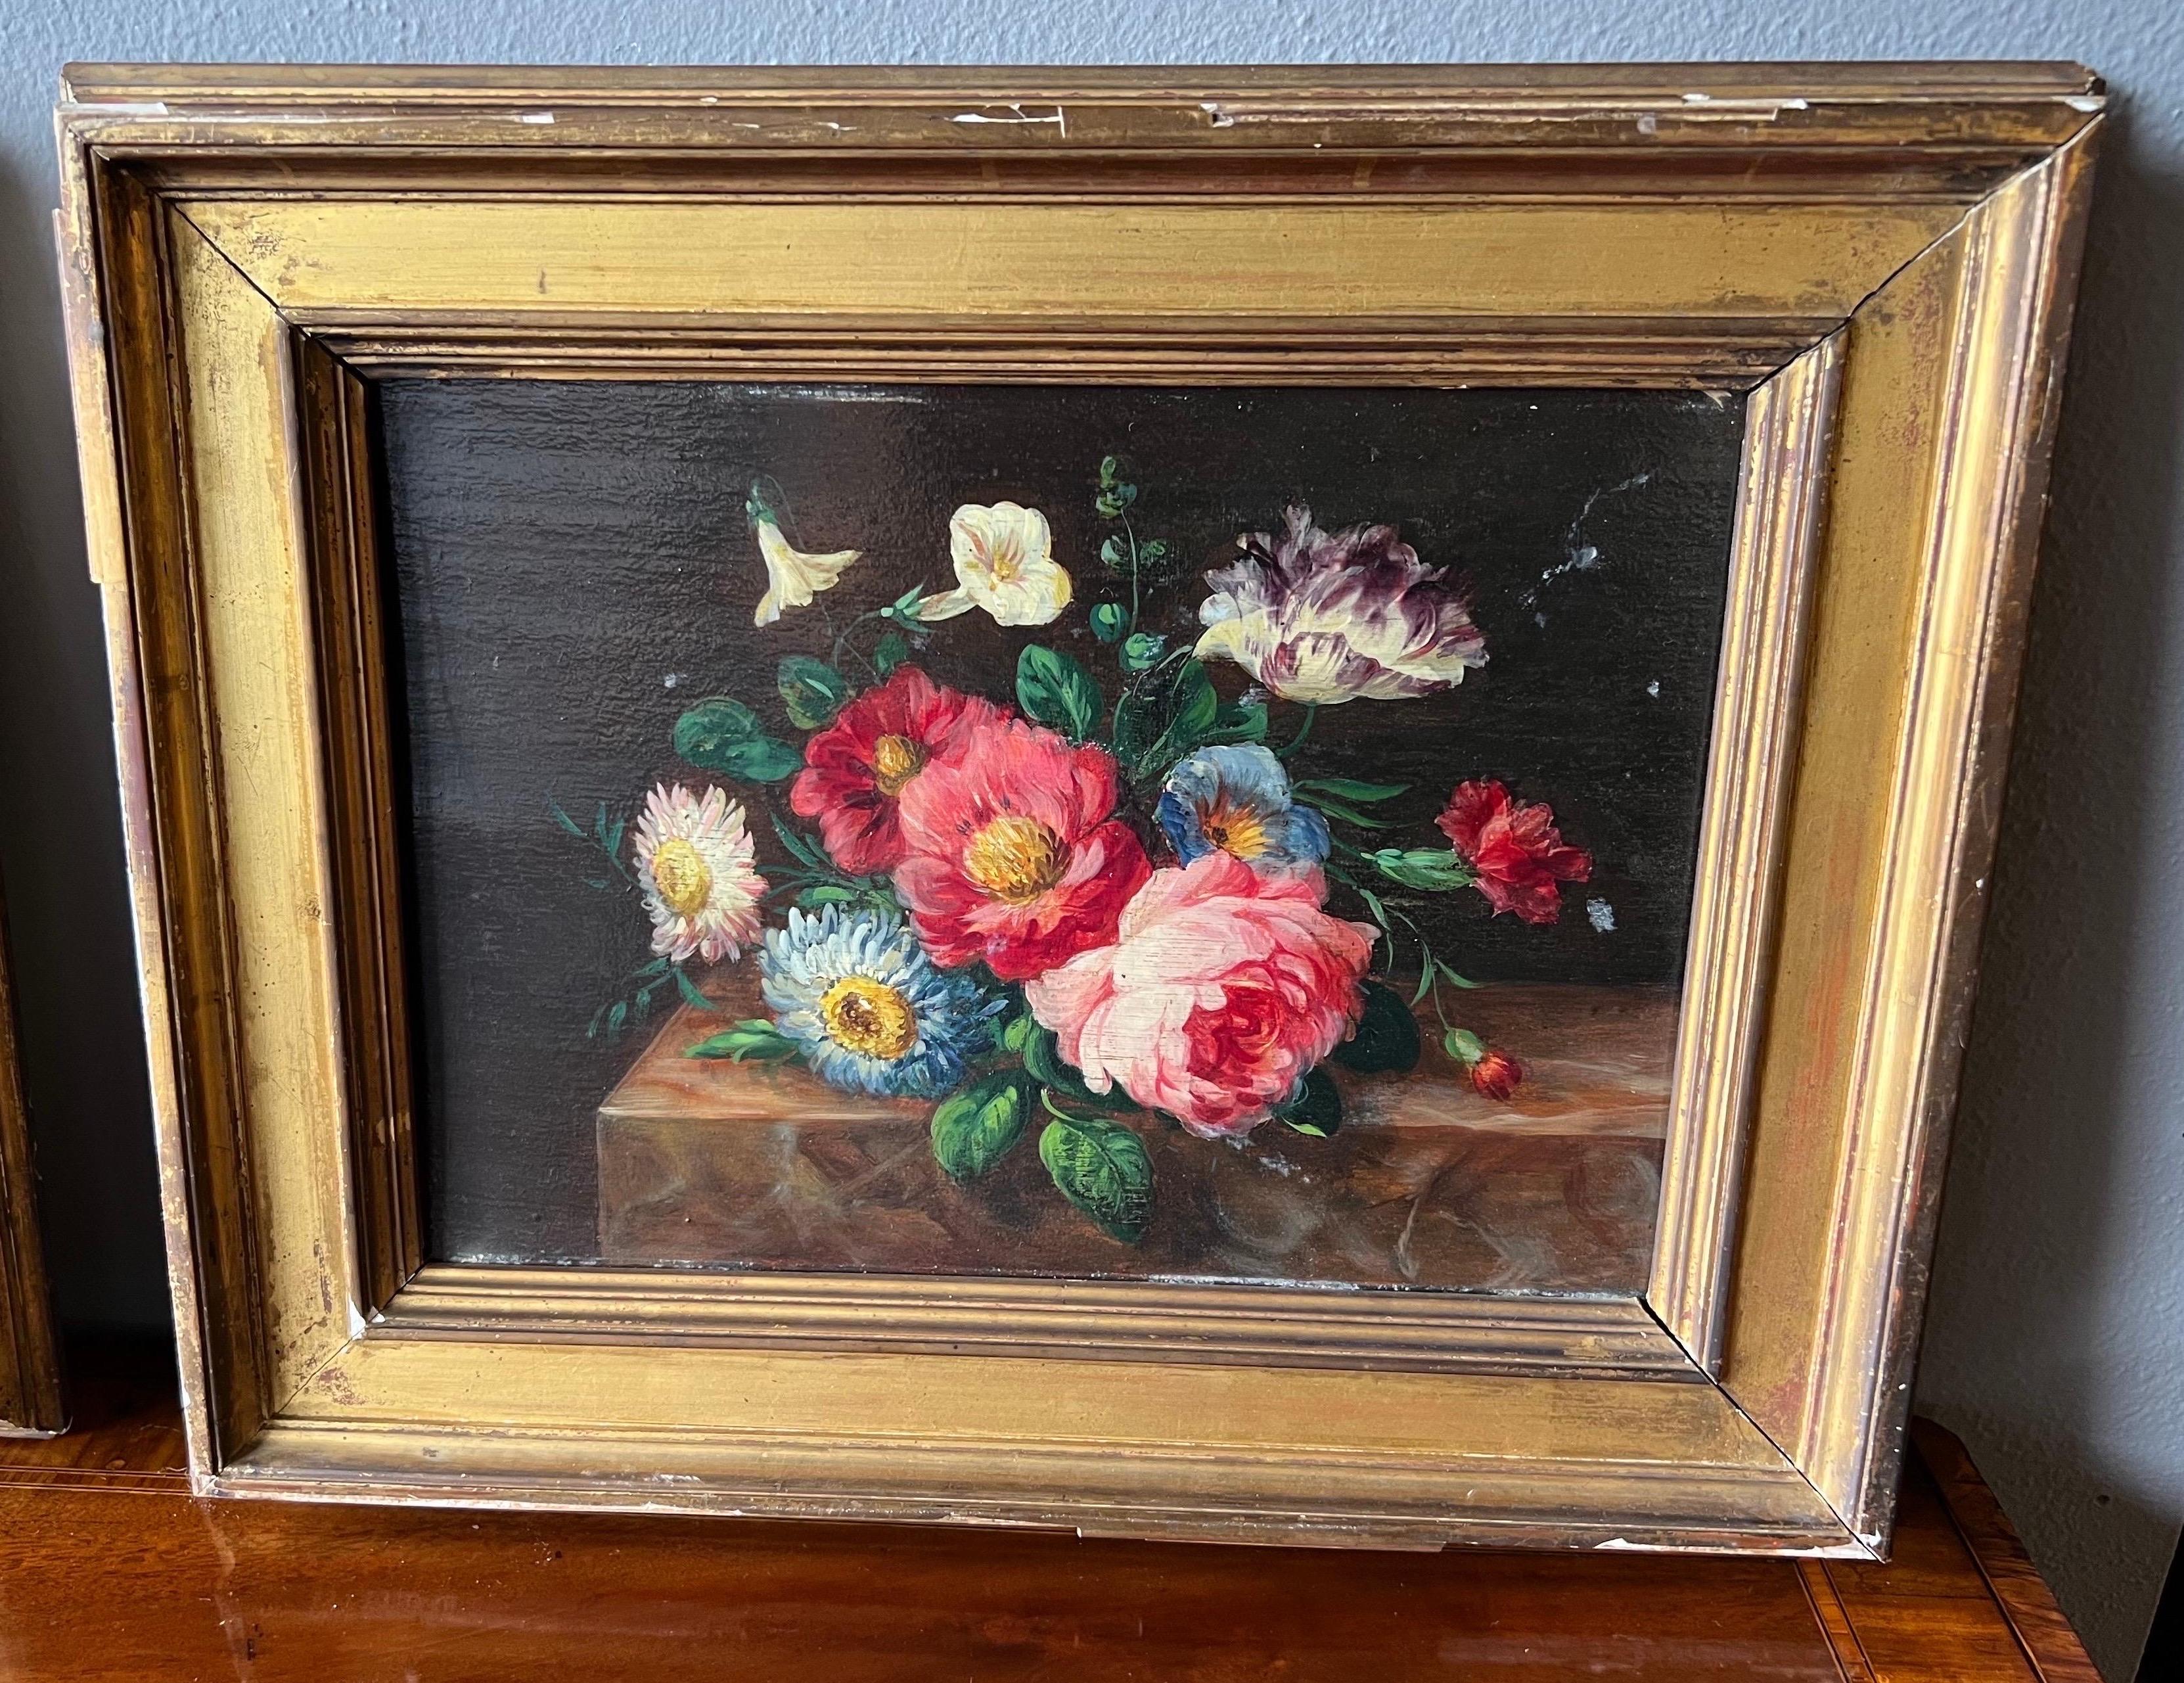 Great pair of small scale 18th- 19th century Flemish school oil on board still life paintings in Giltwood frames.